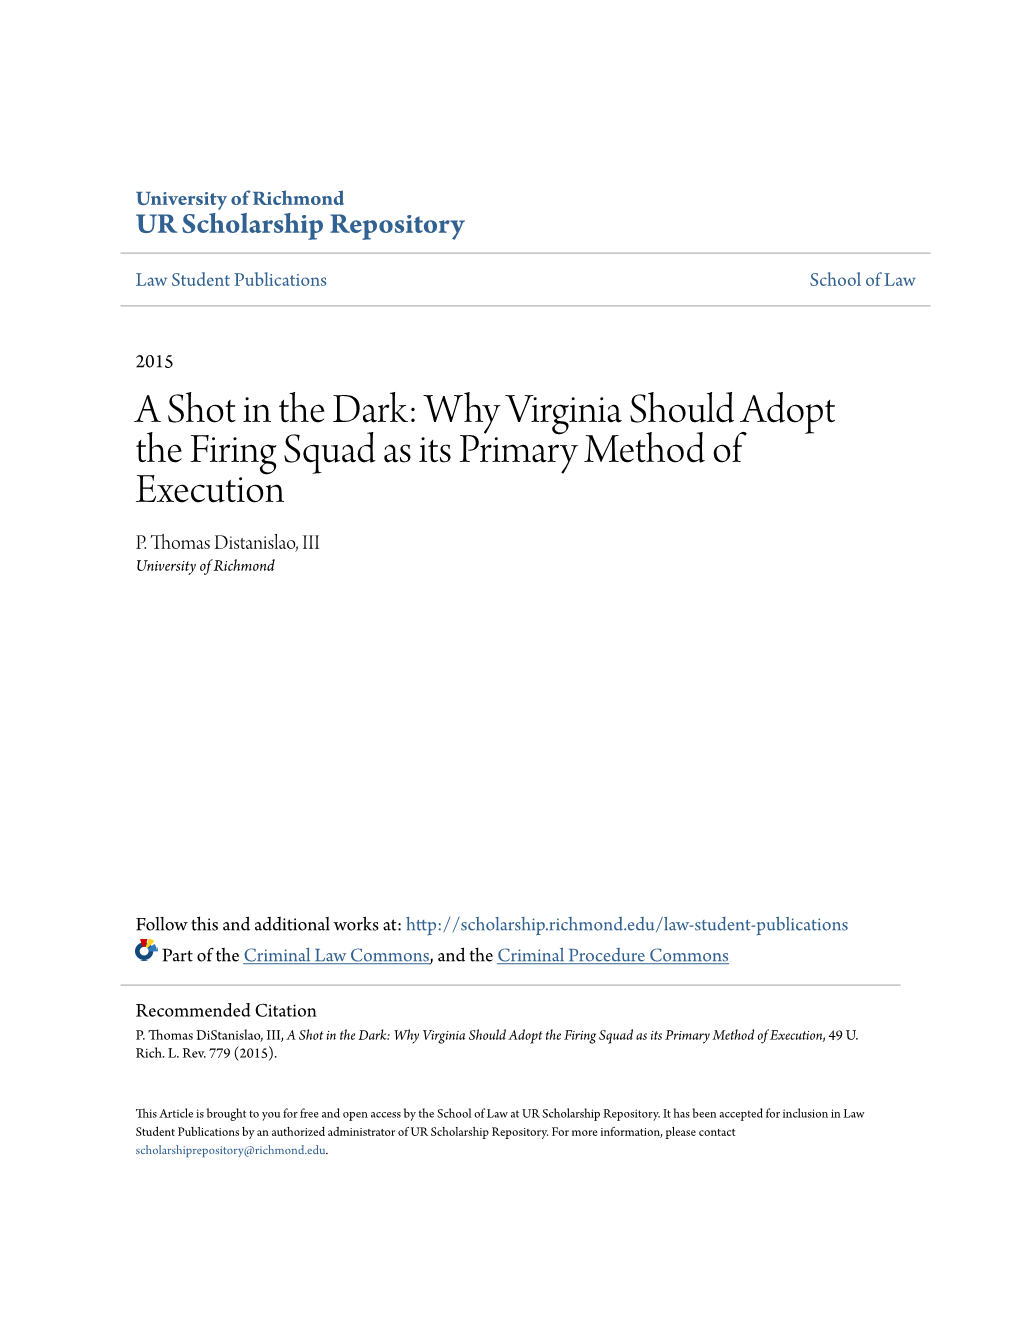 A Shot in the Dark: Why Virginia Should Adopt the Firing Squad As Its Primary Method of Execution P